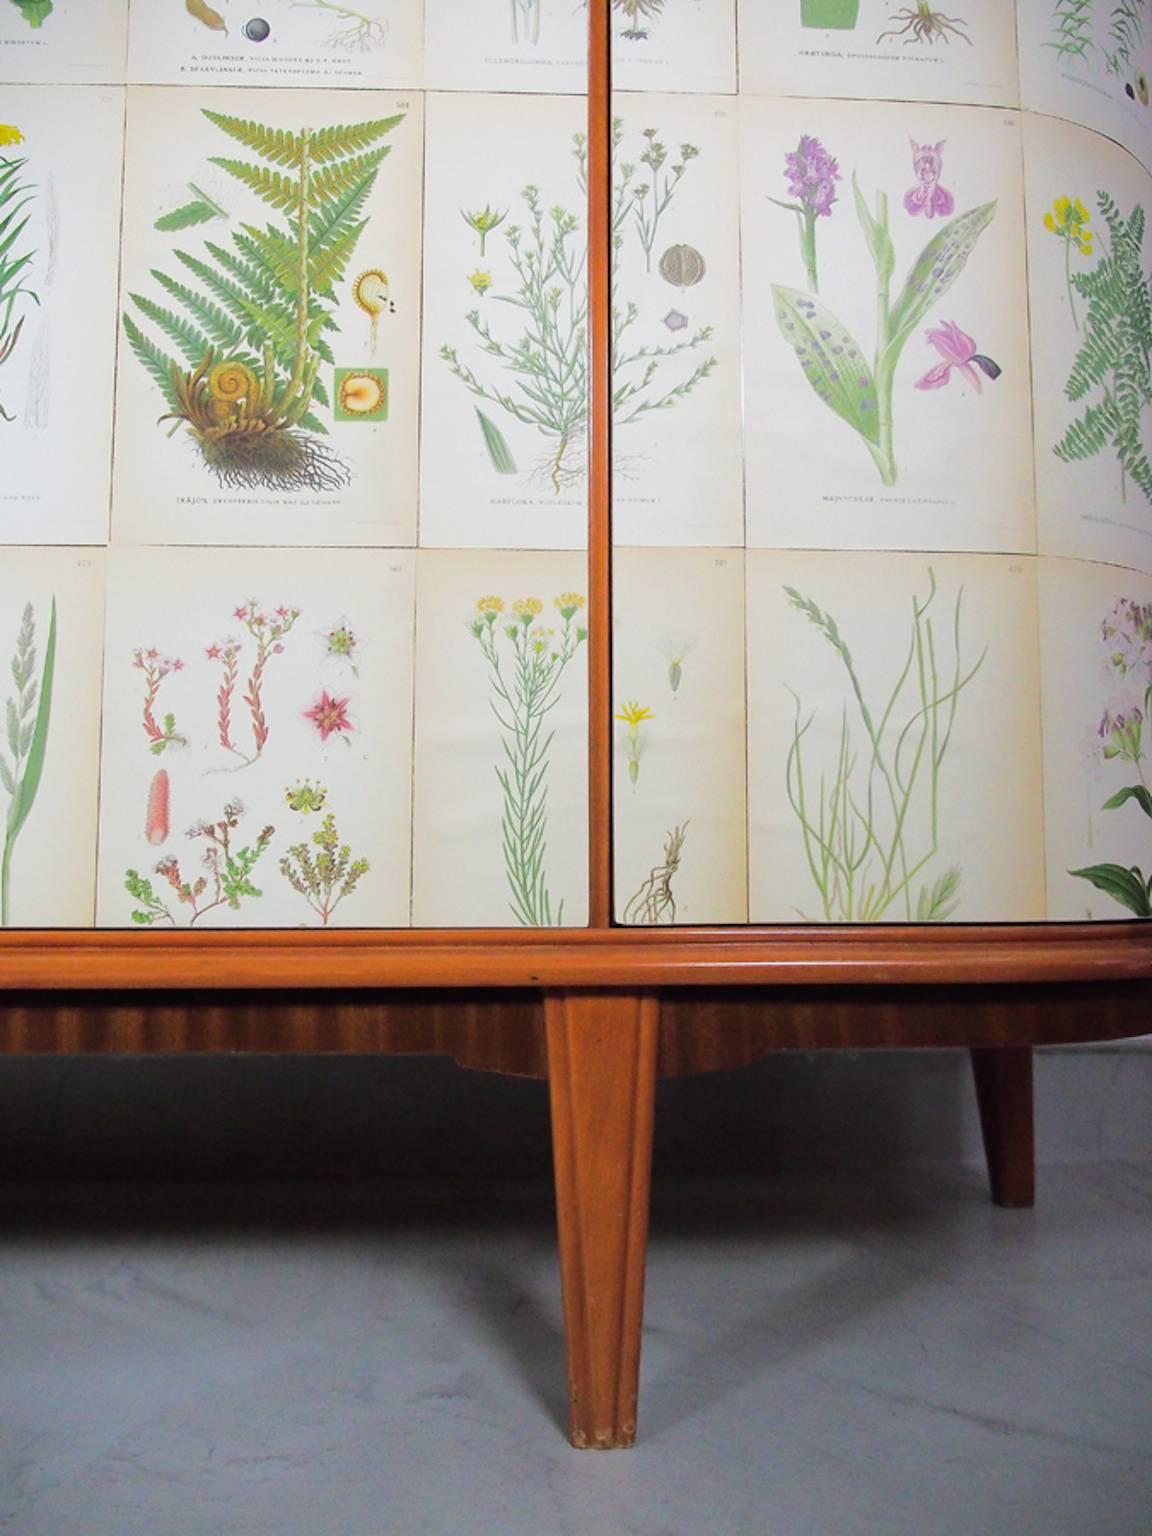 Mid-20th Century Nordens Flora Cabinet with C.A.M. Lindman Decorations 1